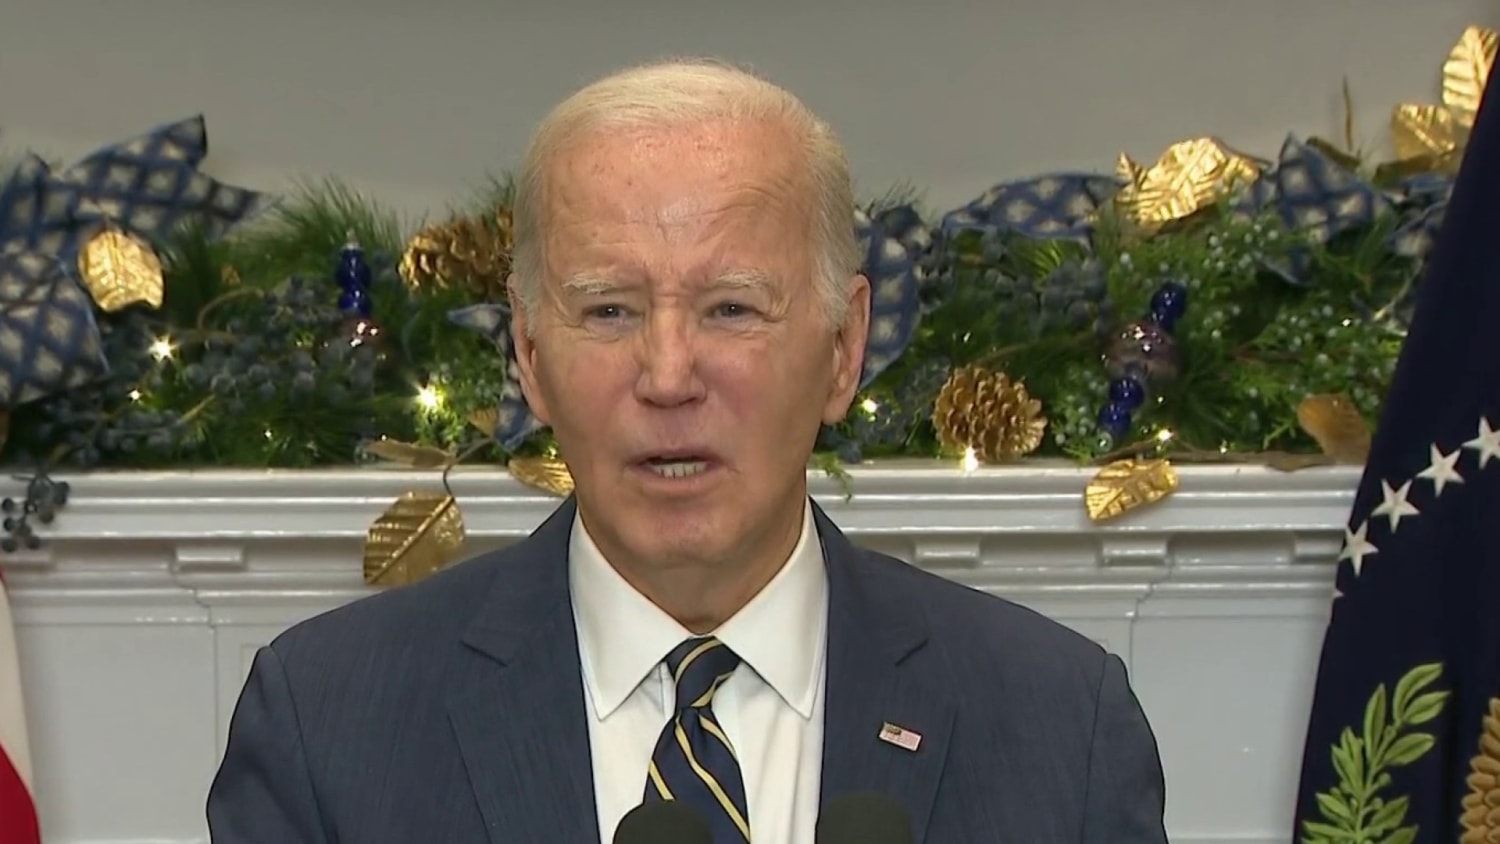 No good answers for Biden as voters recoil over border crossings